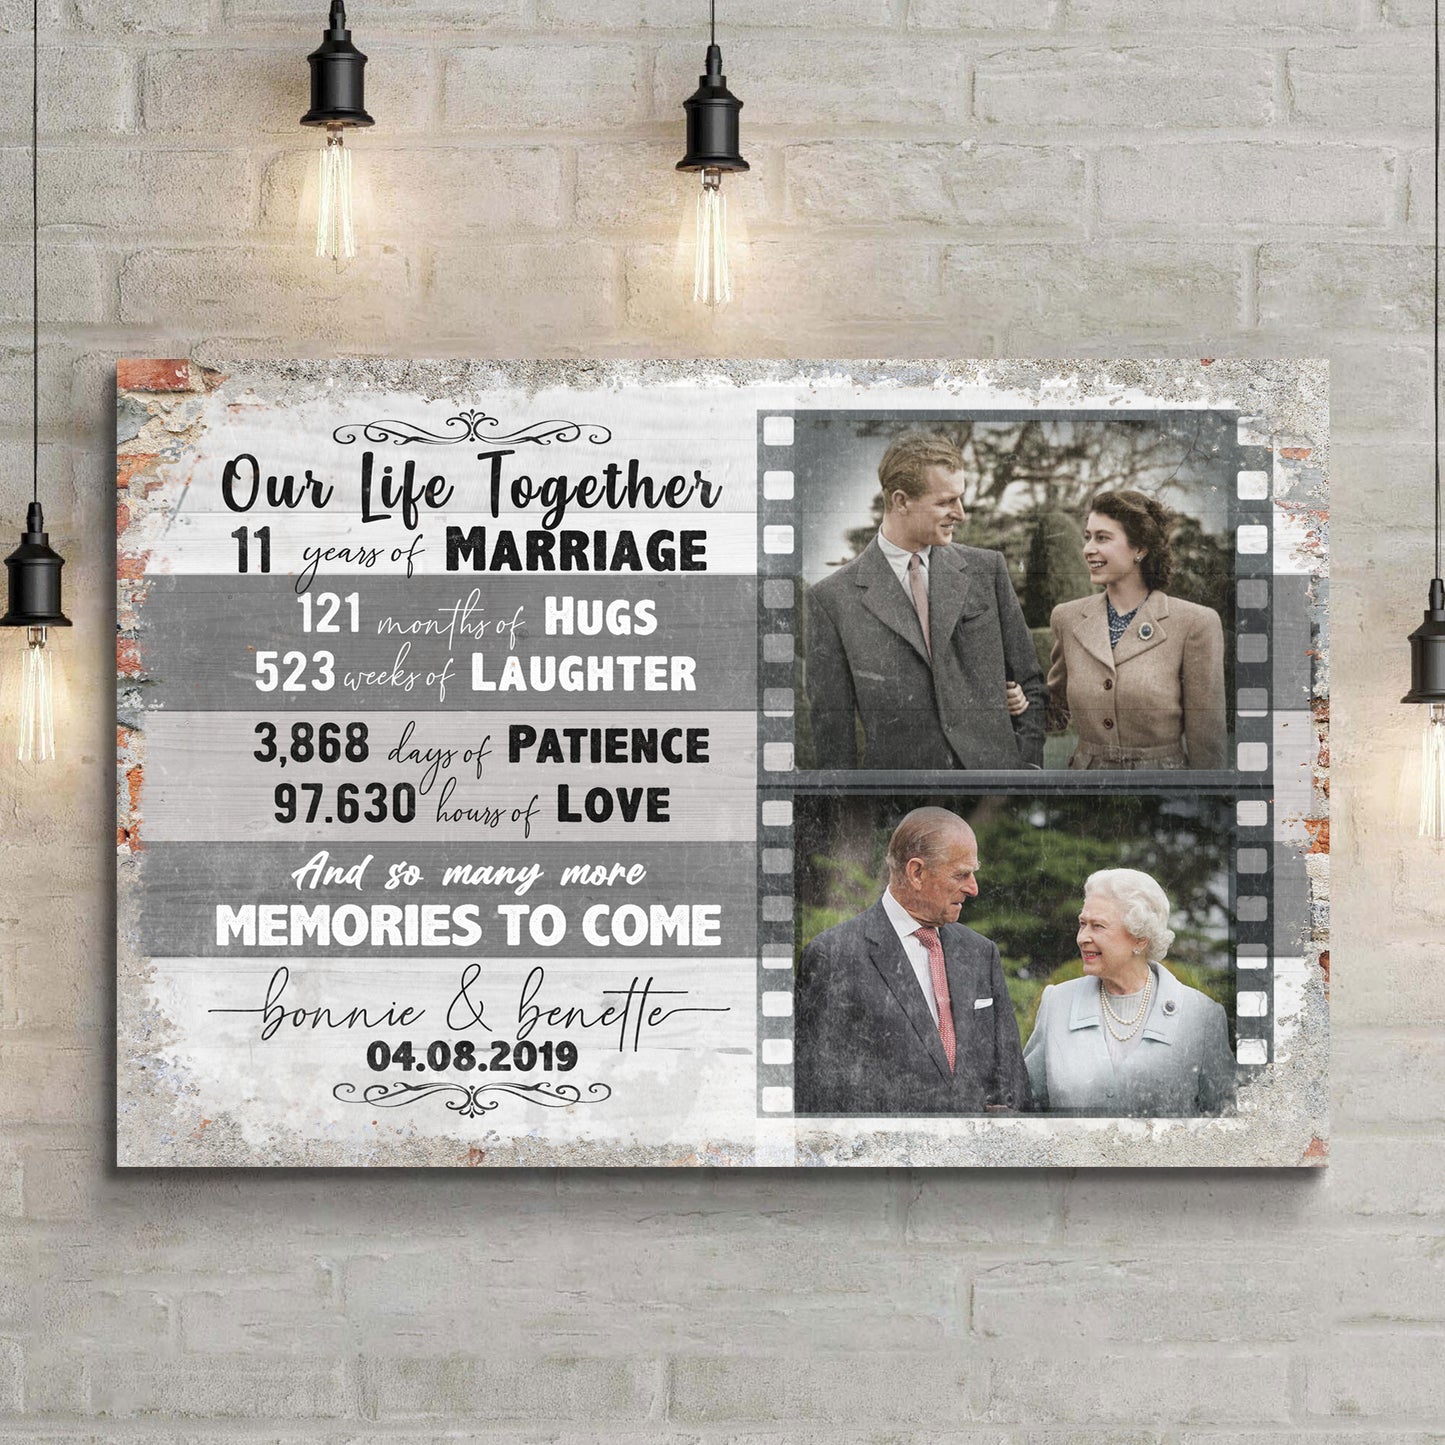 Our Life Together Sign  - Image by Tailored Canvases